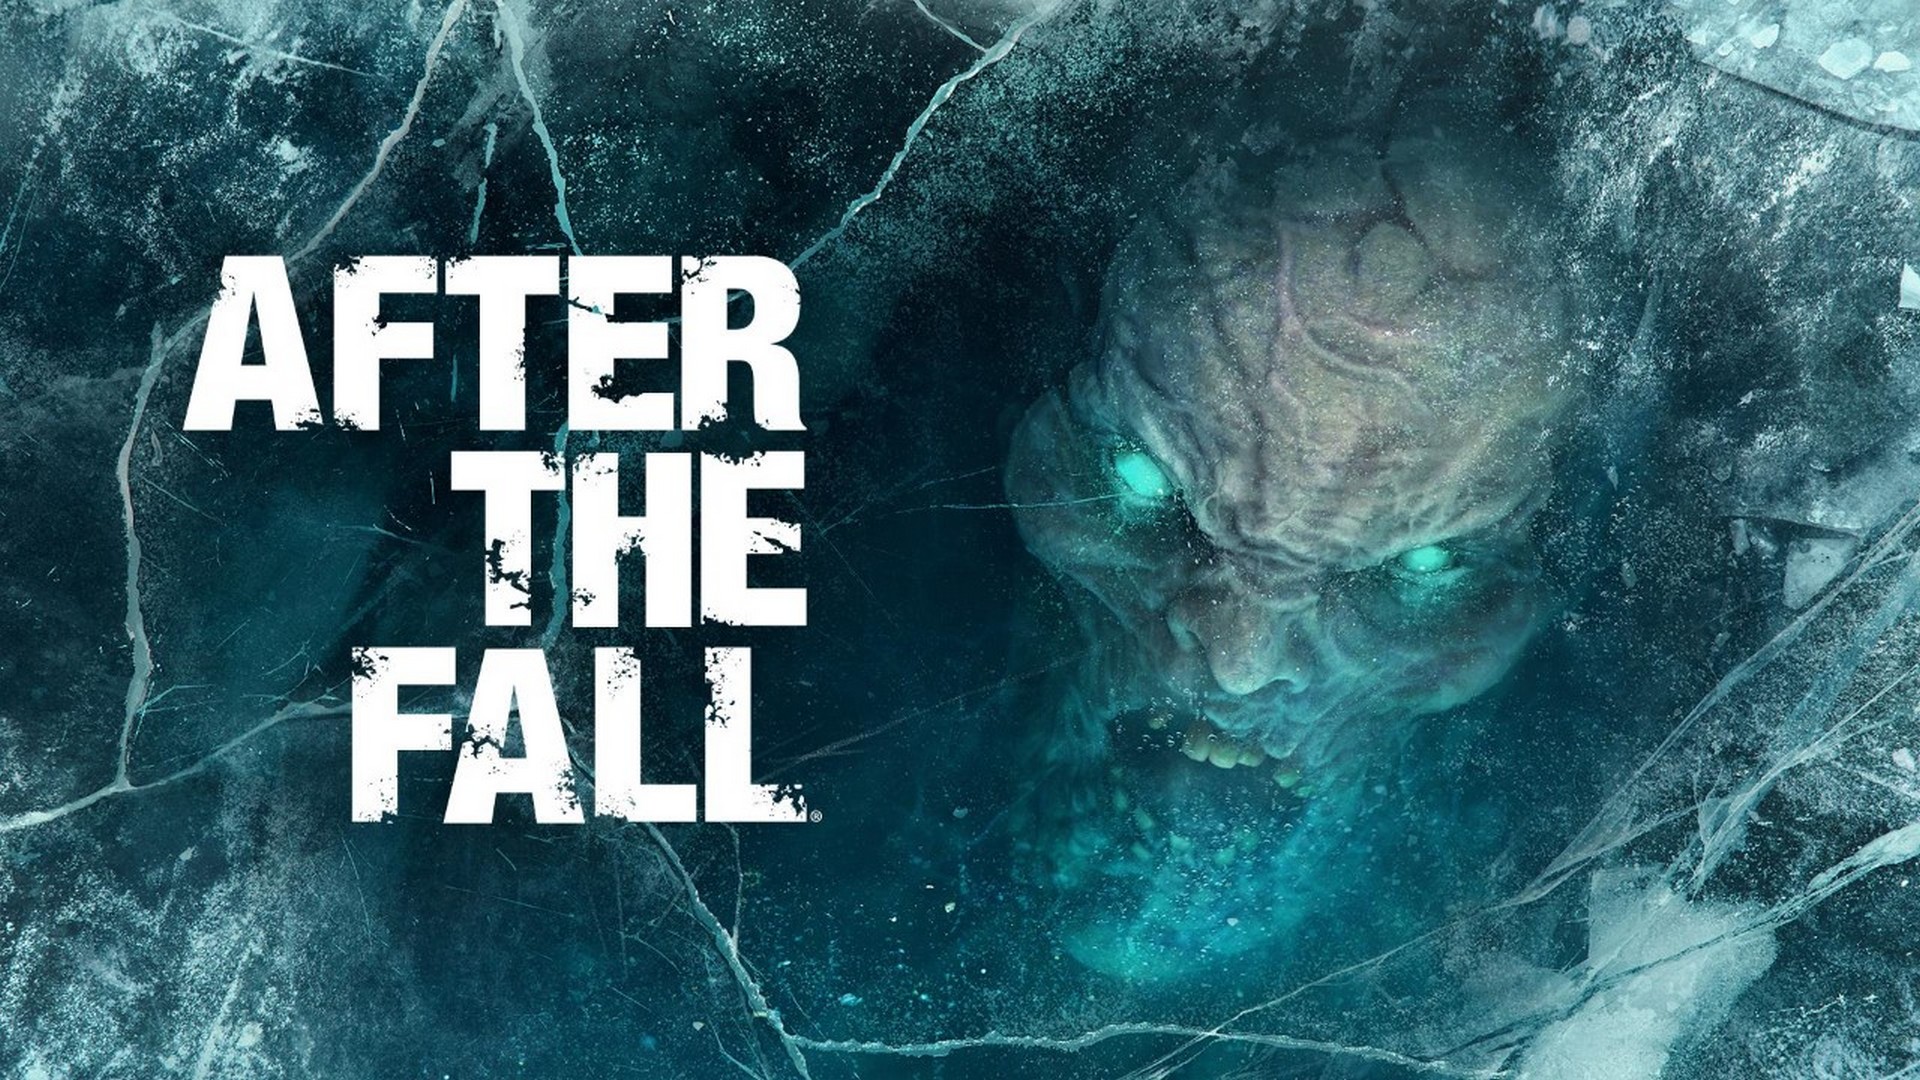 After the fall vr. The after the Fall диск ps4. After the Fall - frontrunner Edition. After the Fall (credit: Vertigo games).